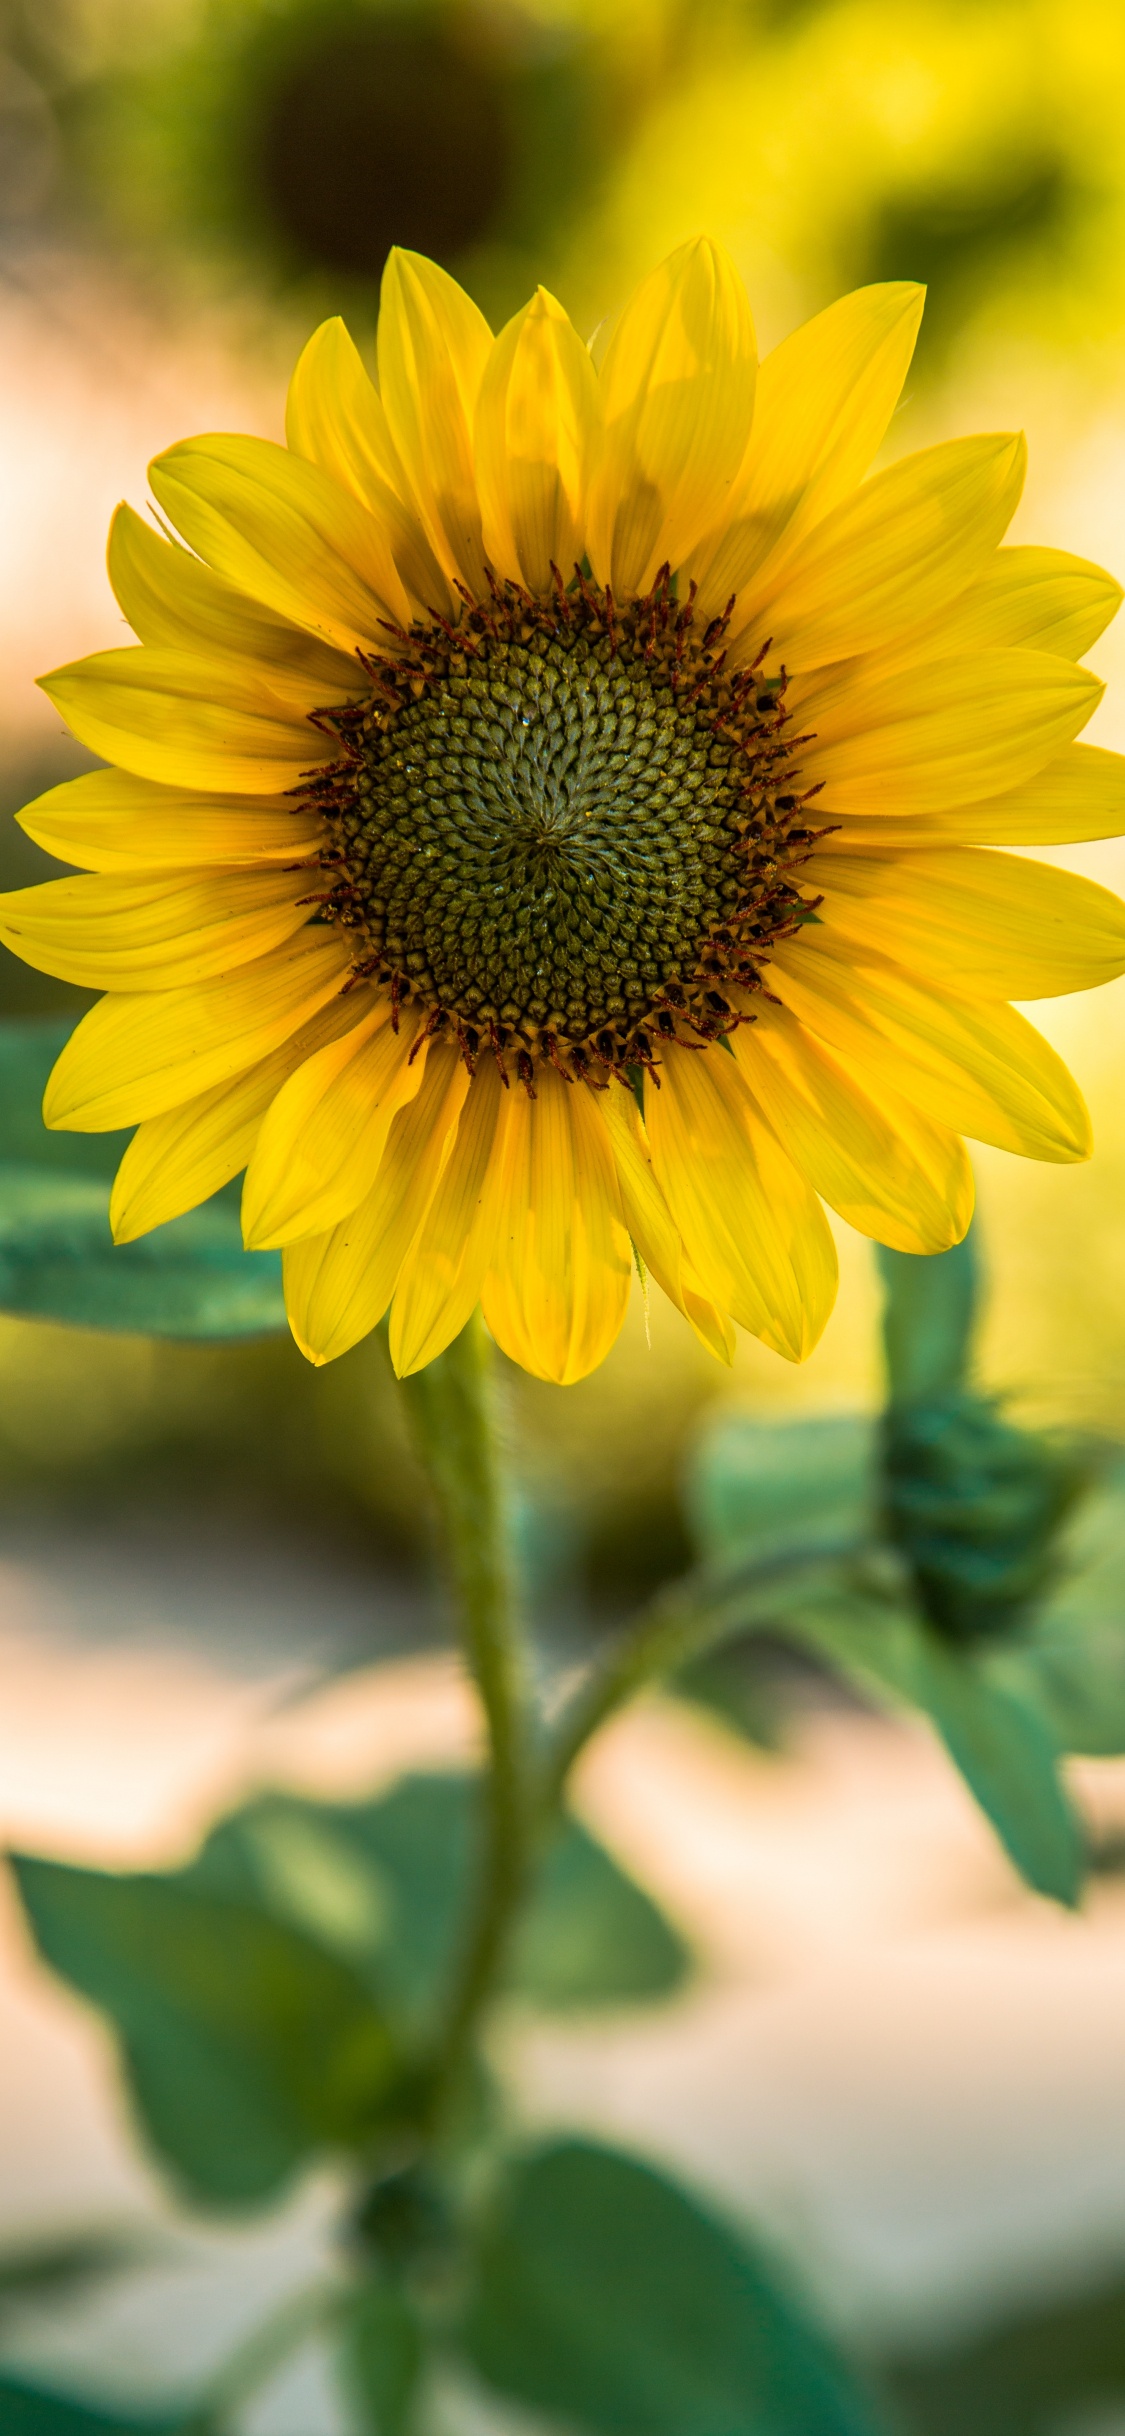 Yellow Sunflower in Close up Photography. Wallpaper in 1125x2436 Resolution